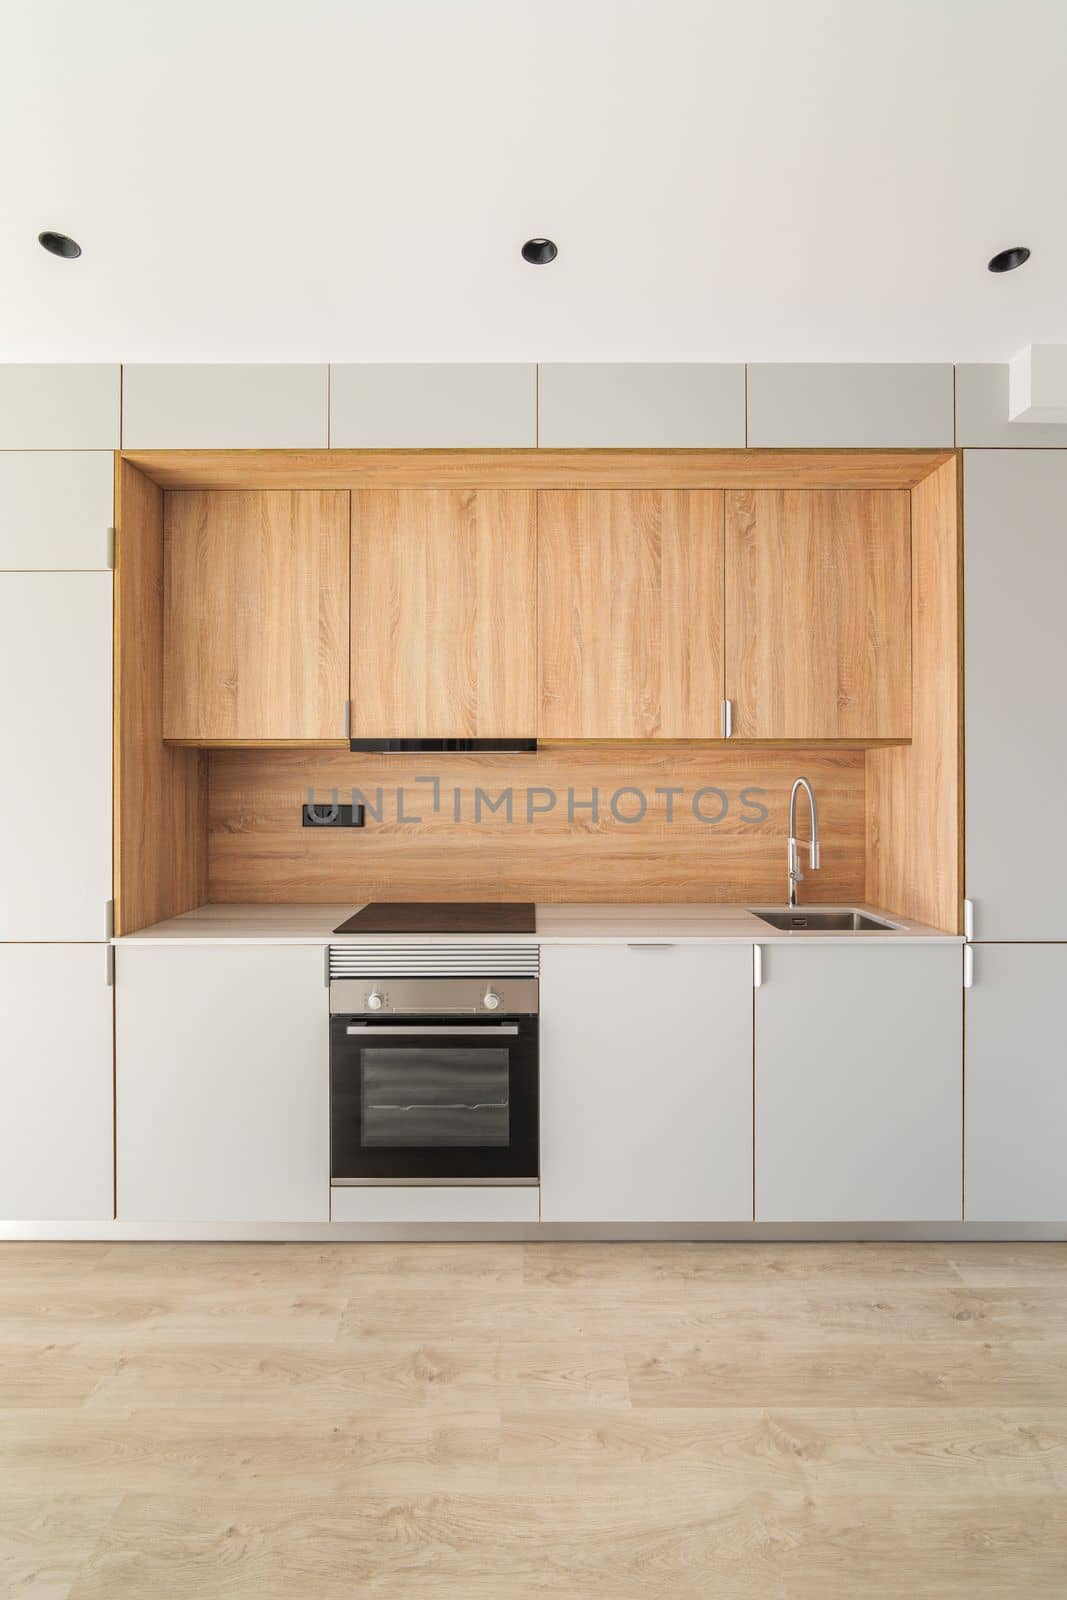 Simple empty modular kitchen area in modern apartment. Furniture minimalism with lots of cabinets, oven and stove for cooking delicious food